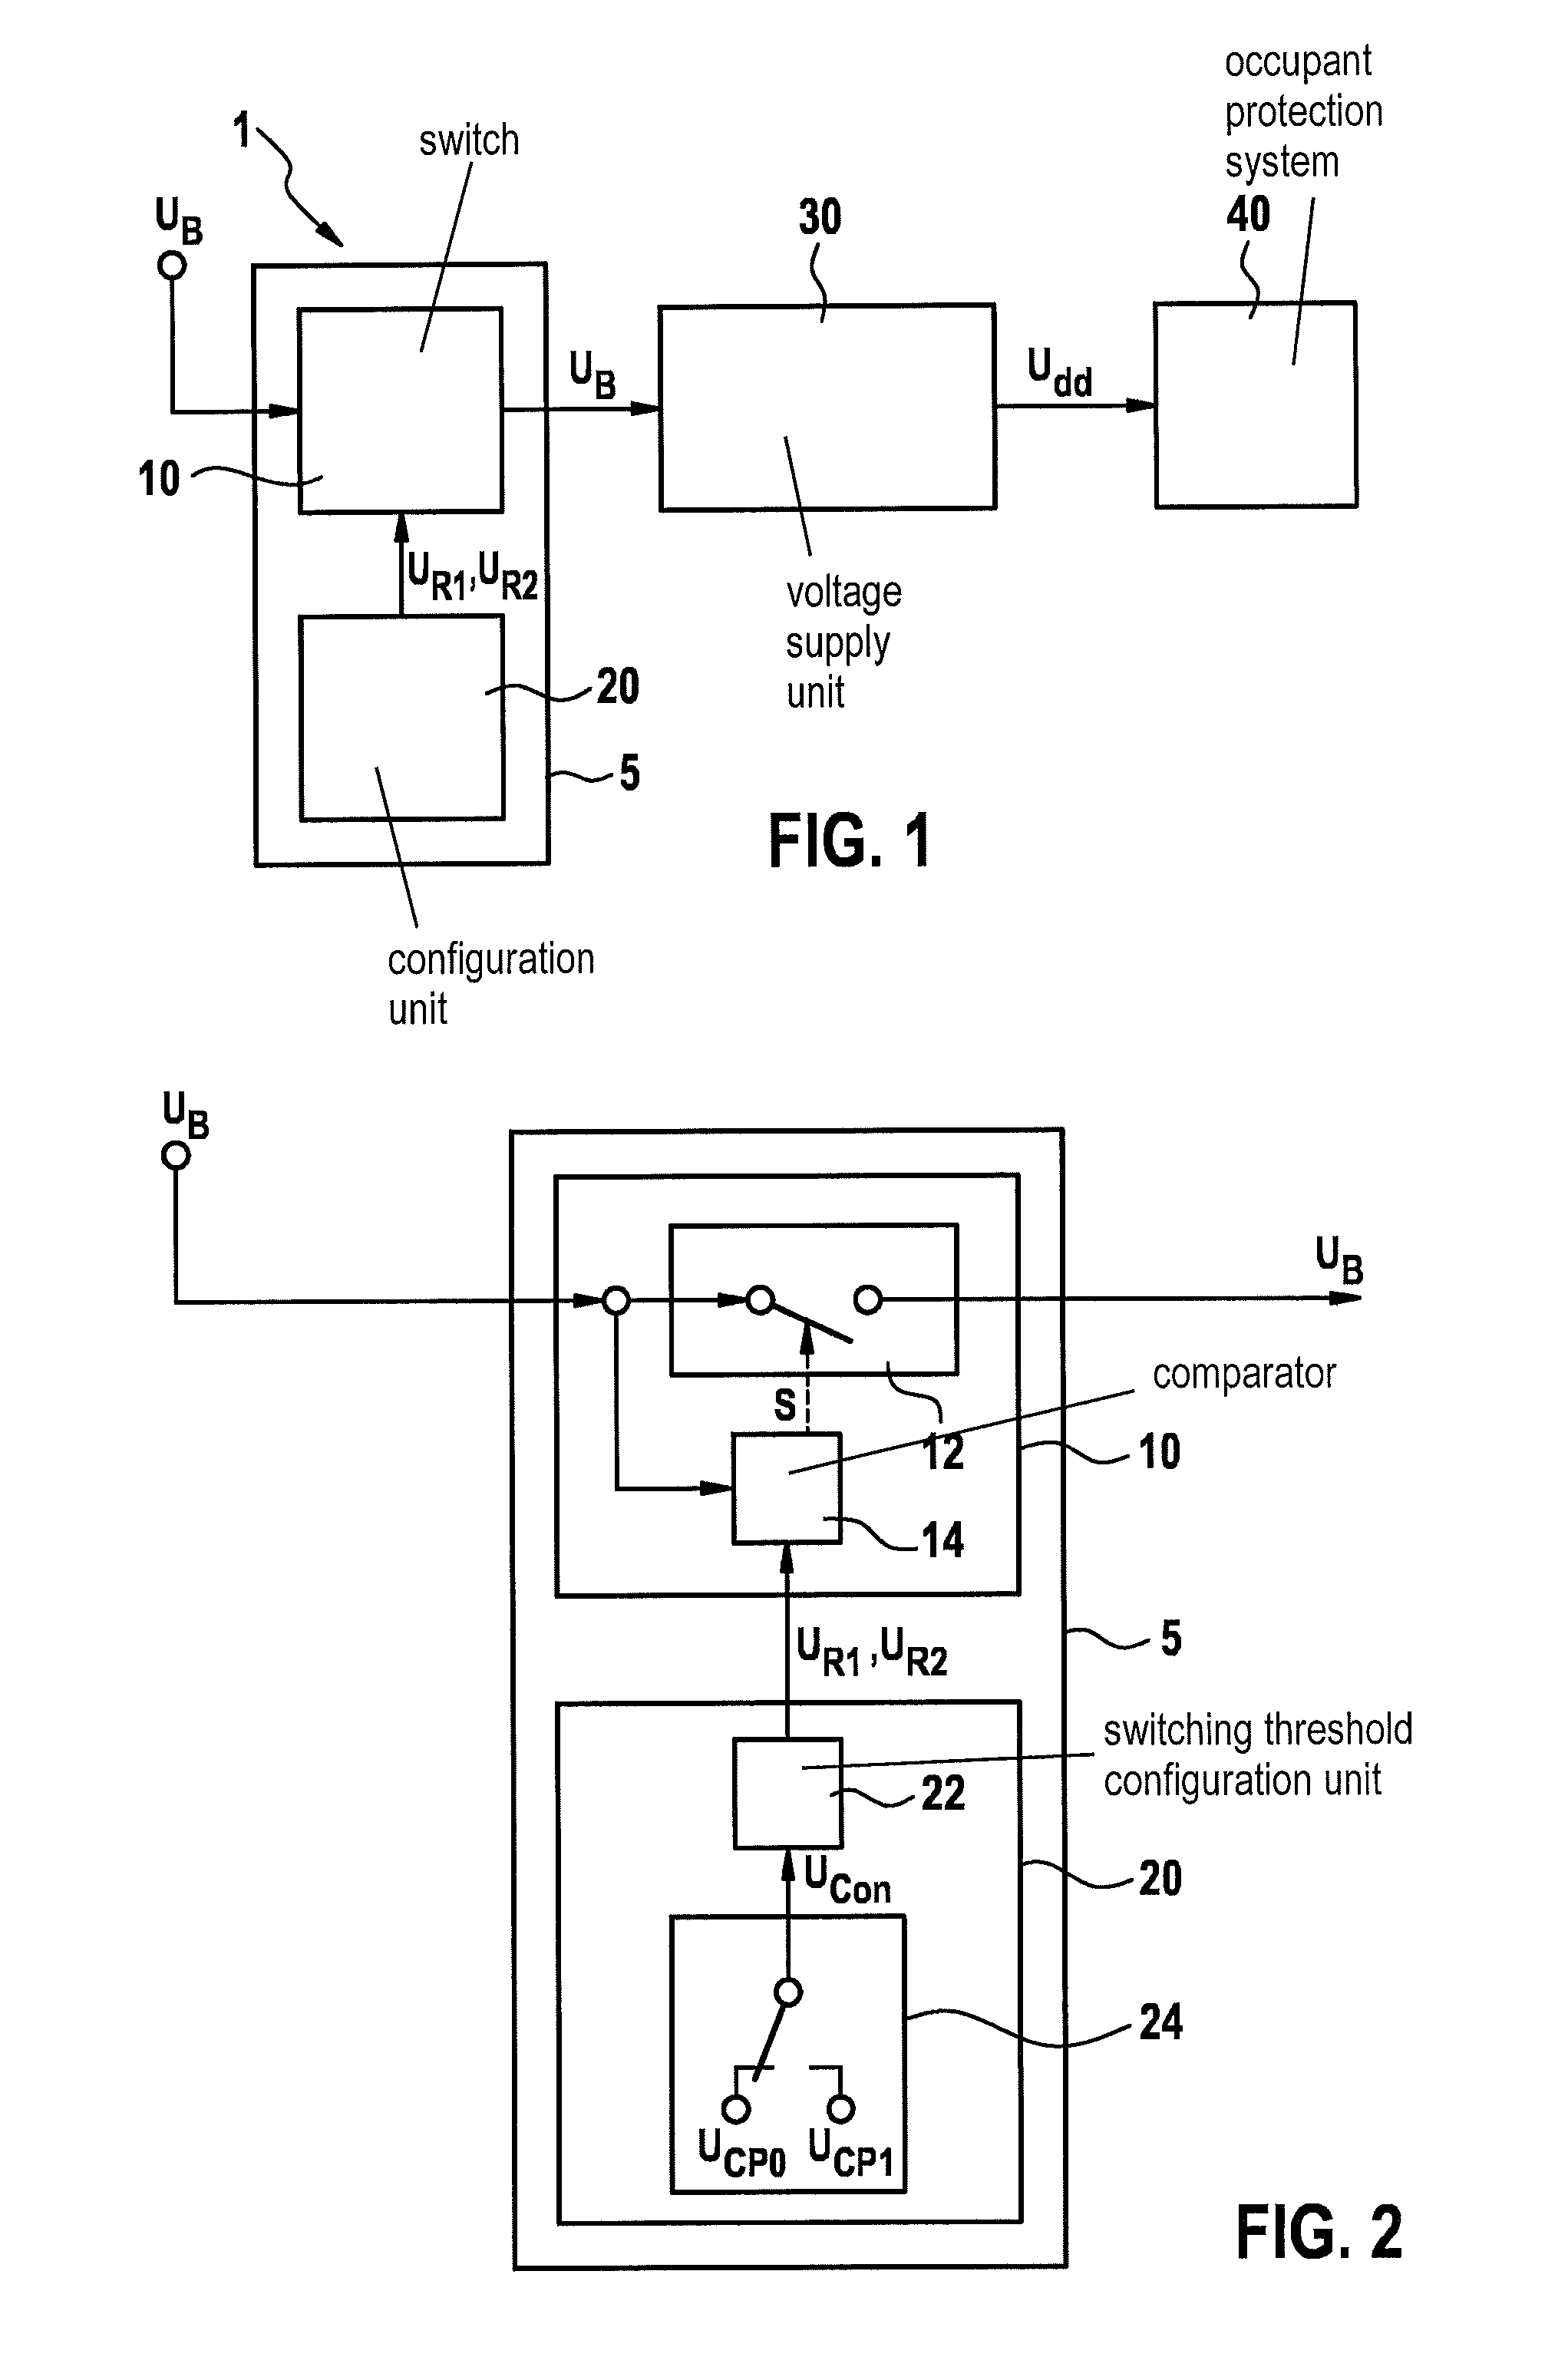 Device and method for the voltage supply of an occupant protection system